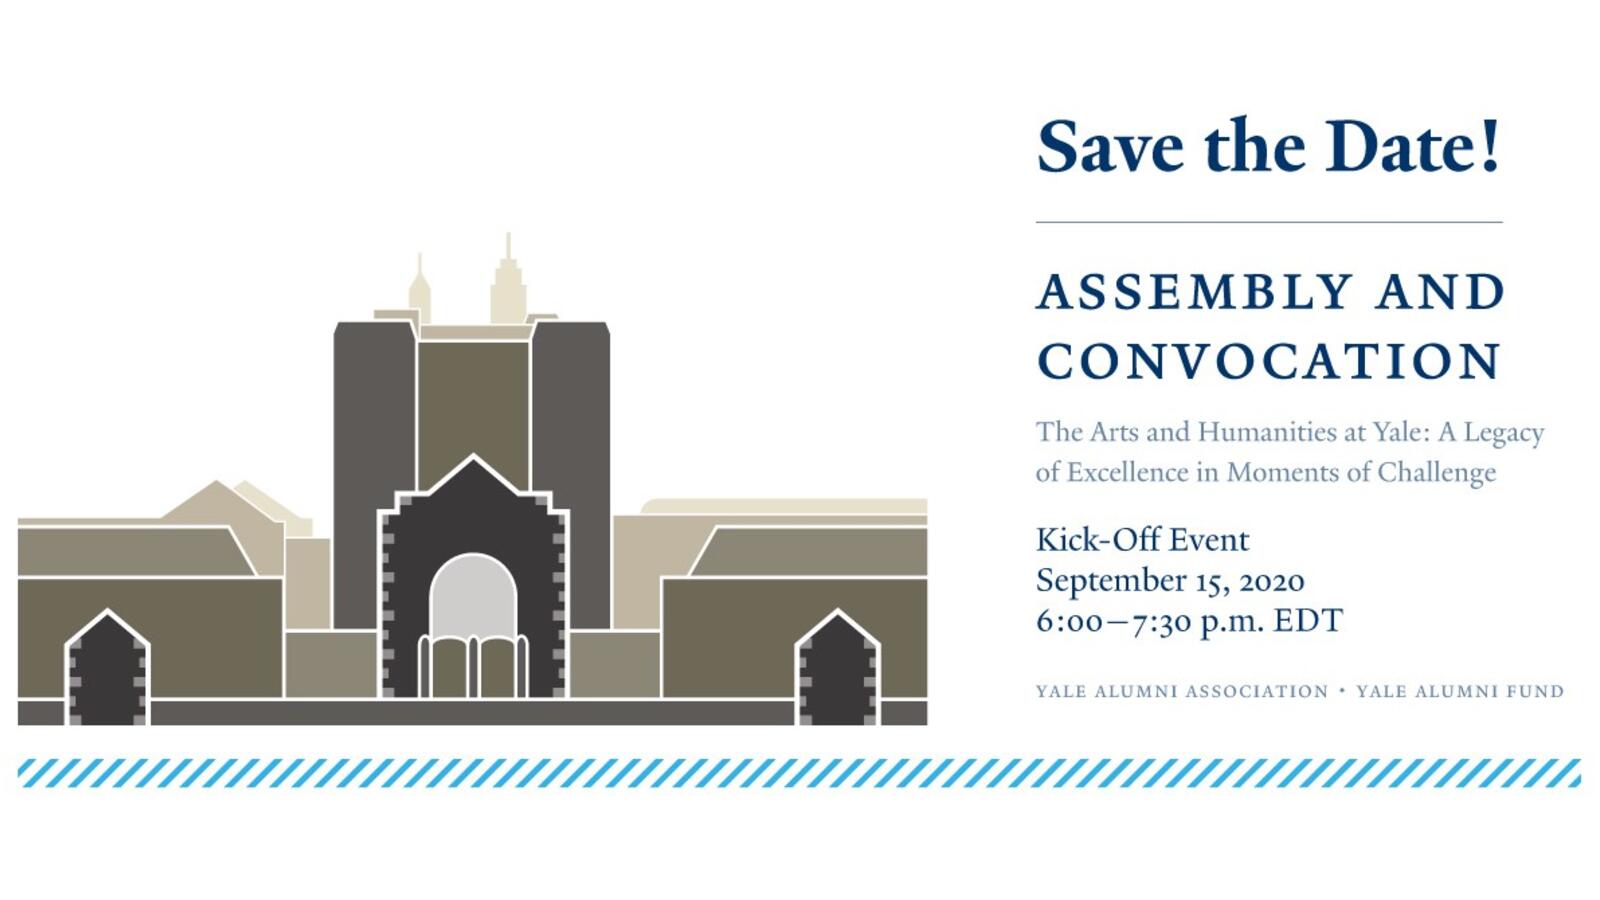 Graphic for the kick-off event for 2020 Assemly and Convocation